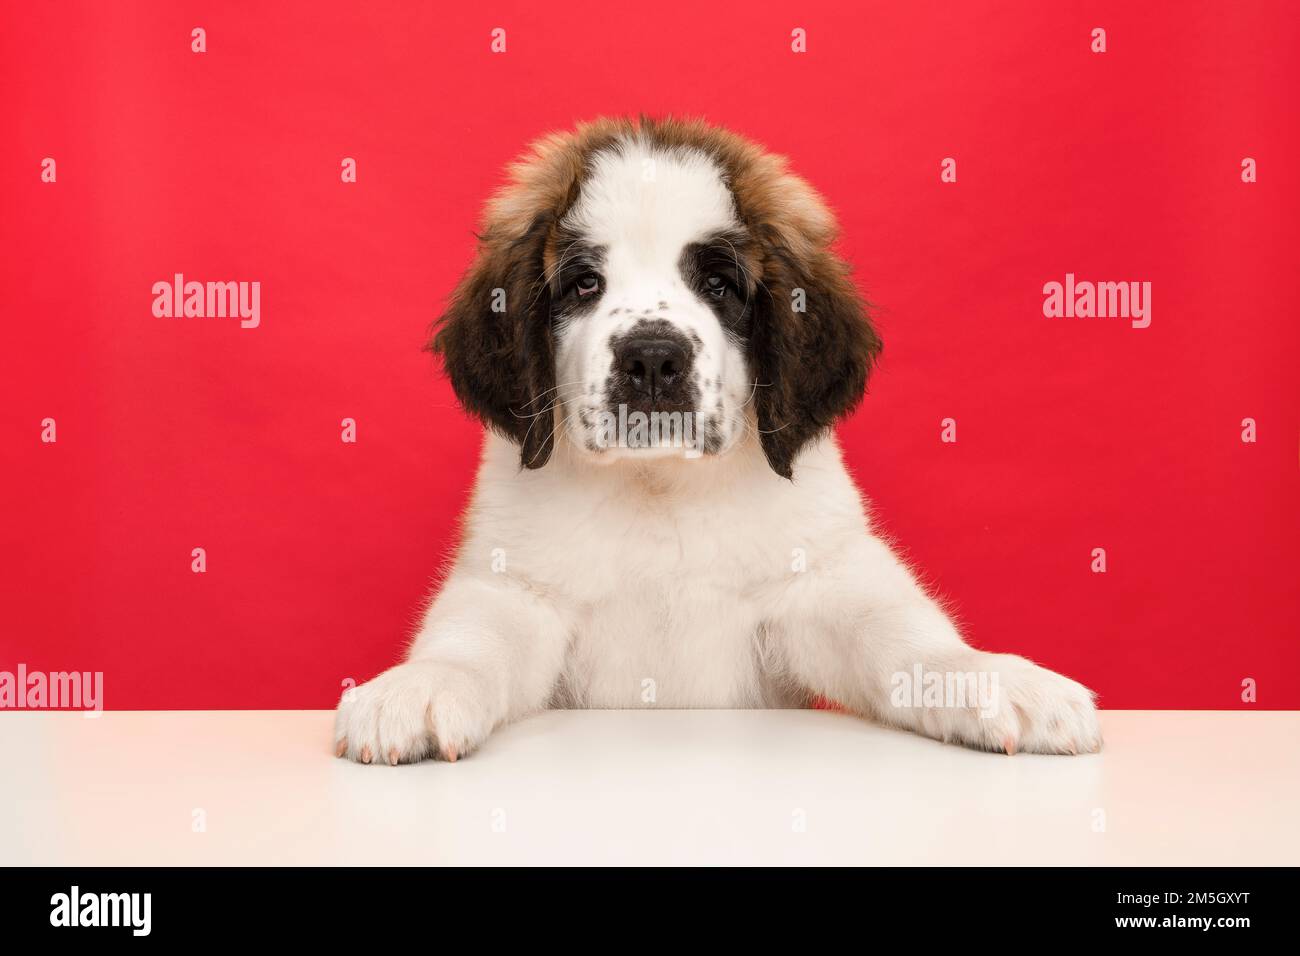 Saint Bernard puppy portrait on a red and white background Stock Photo